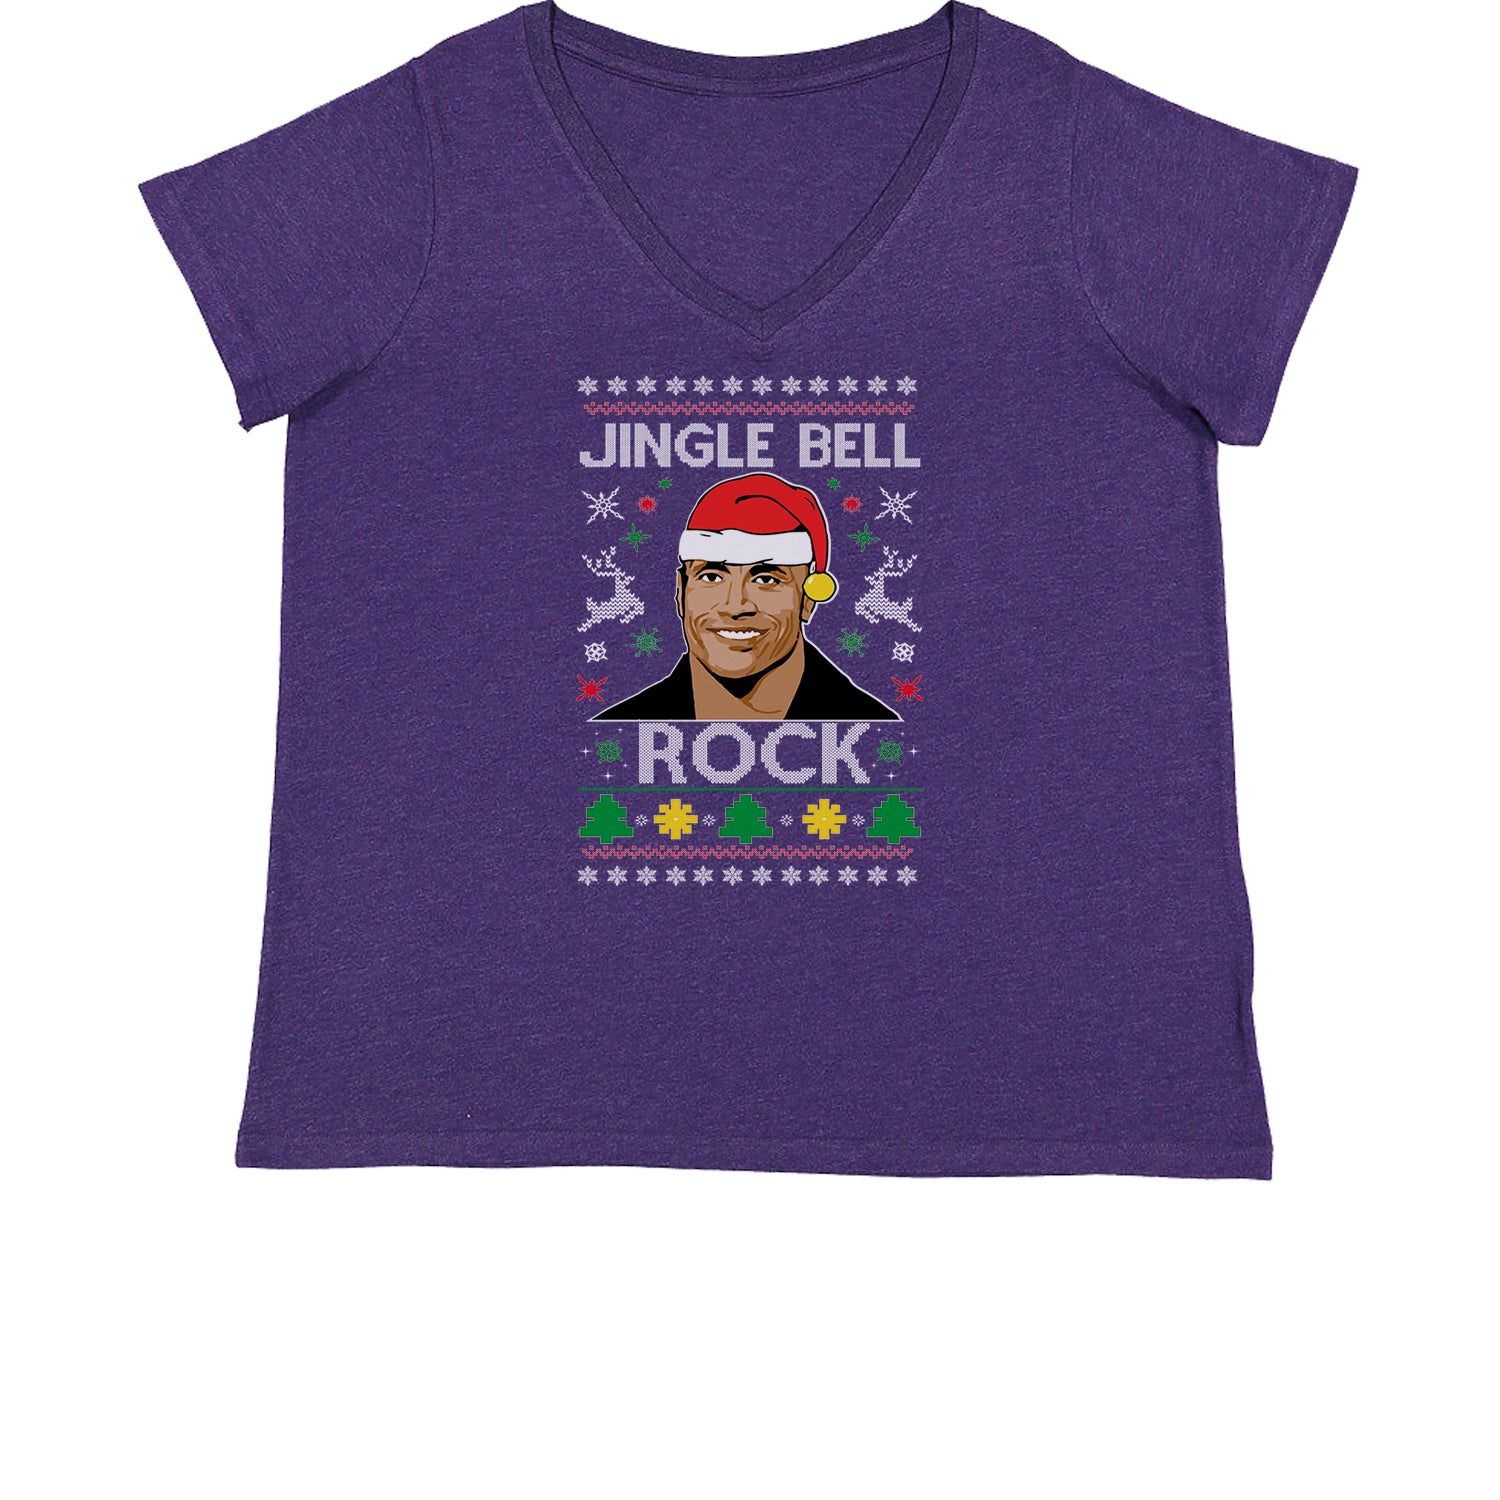 Jingle Bell Rock Ugly Christmas Womens Plus Size V-Neck T-shirt 2018, champ, Christmas, dwayne, johnson, peoples, rock, Sweatshirts, the, Ugly by Expression Tees